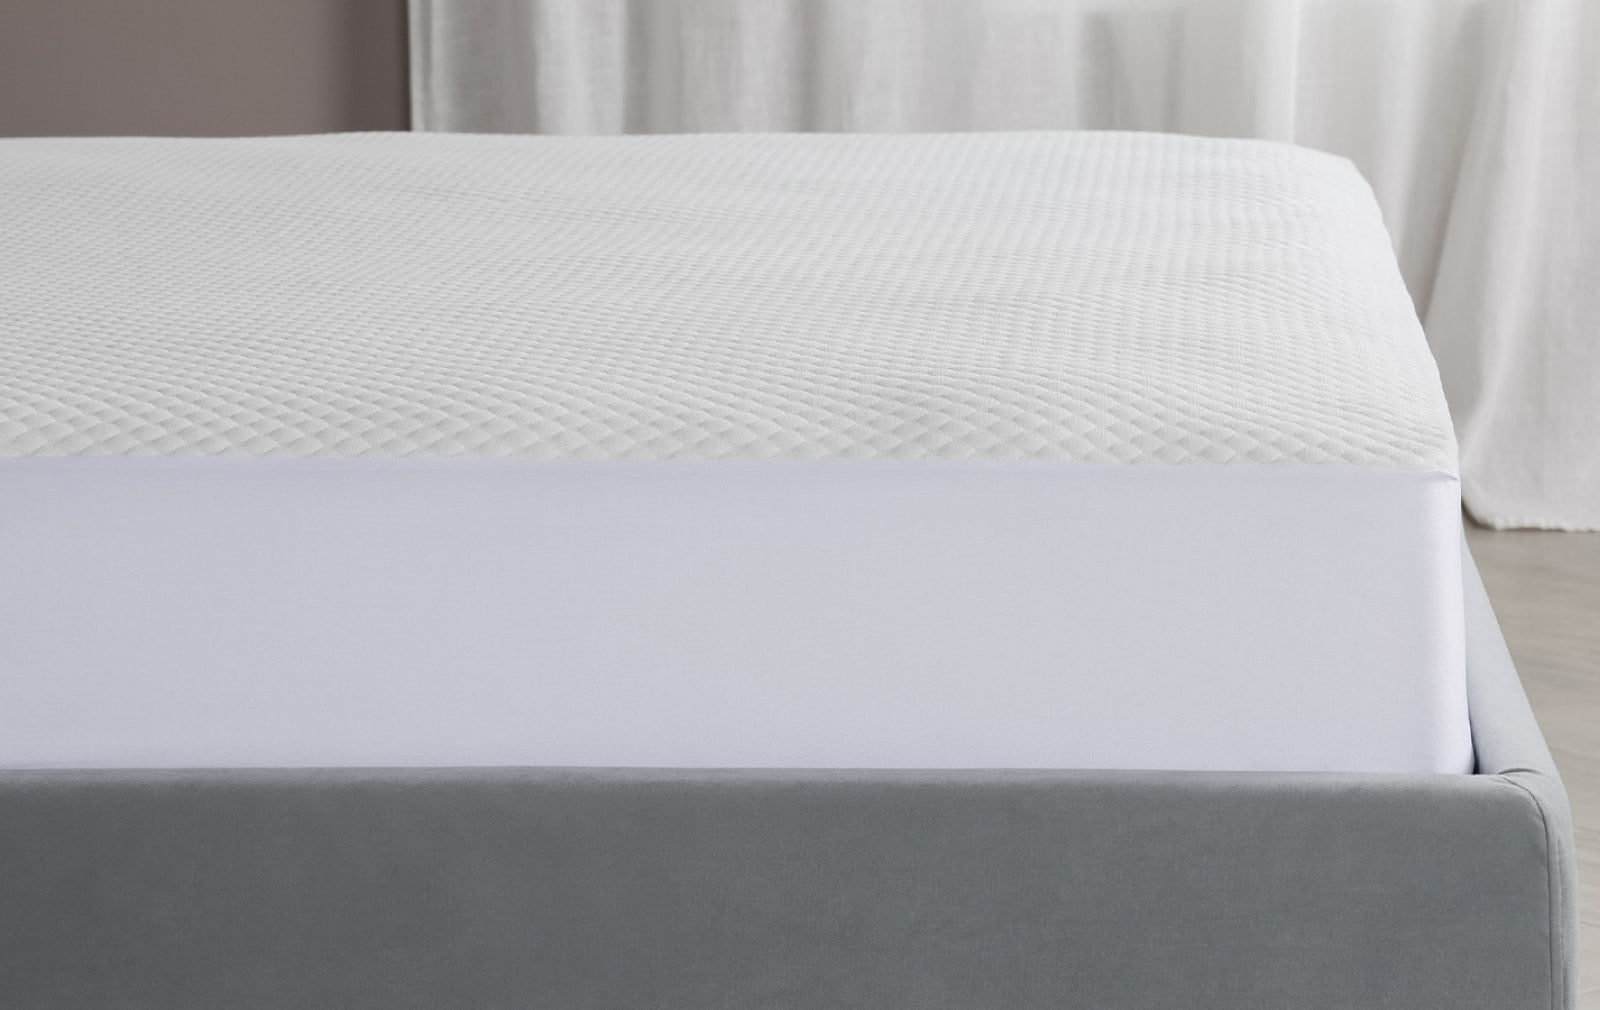 Clima-Dry Mattress Protective Cover